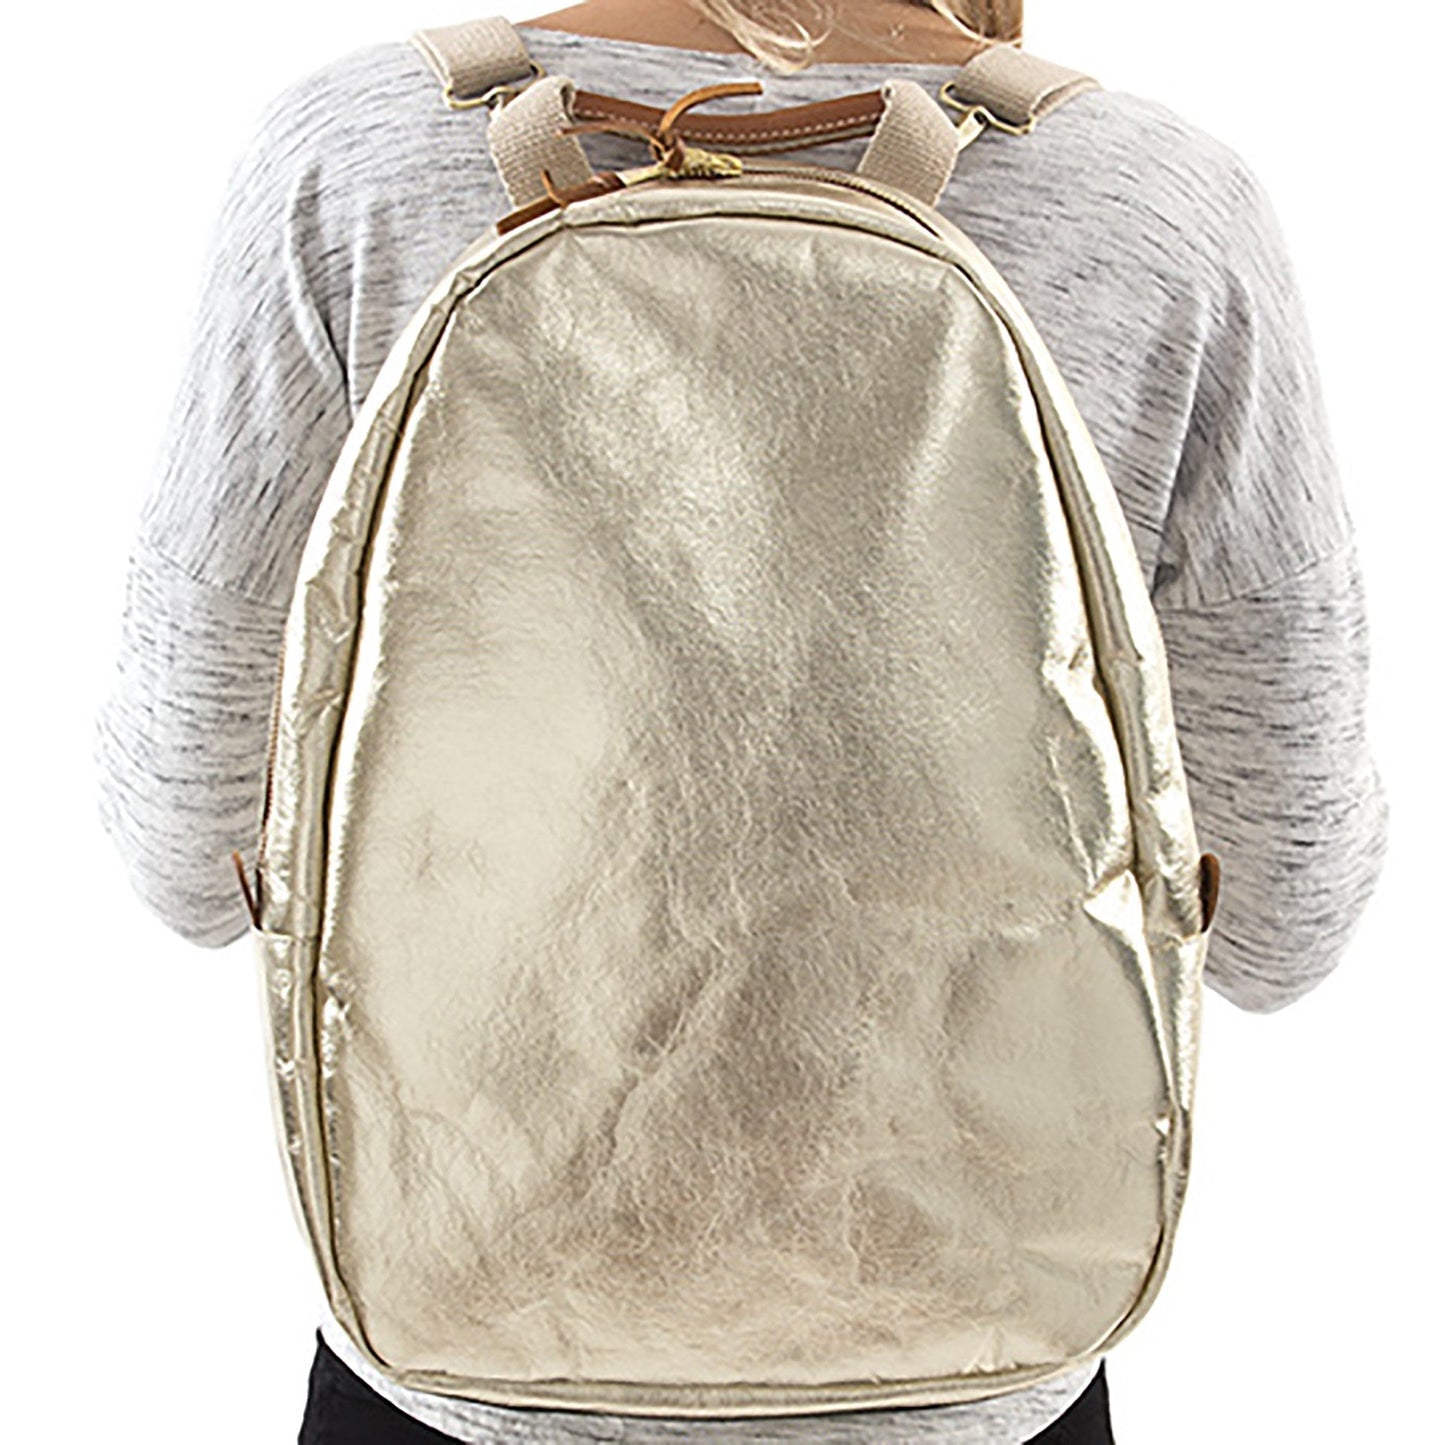 A blonde woman is shown wearing a washable paper backpack. It has two side zip toggles, is oval in shape and it is metallic gold in colour.